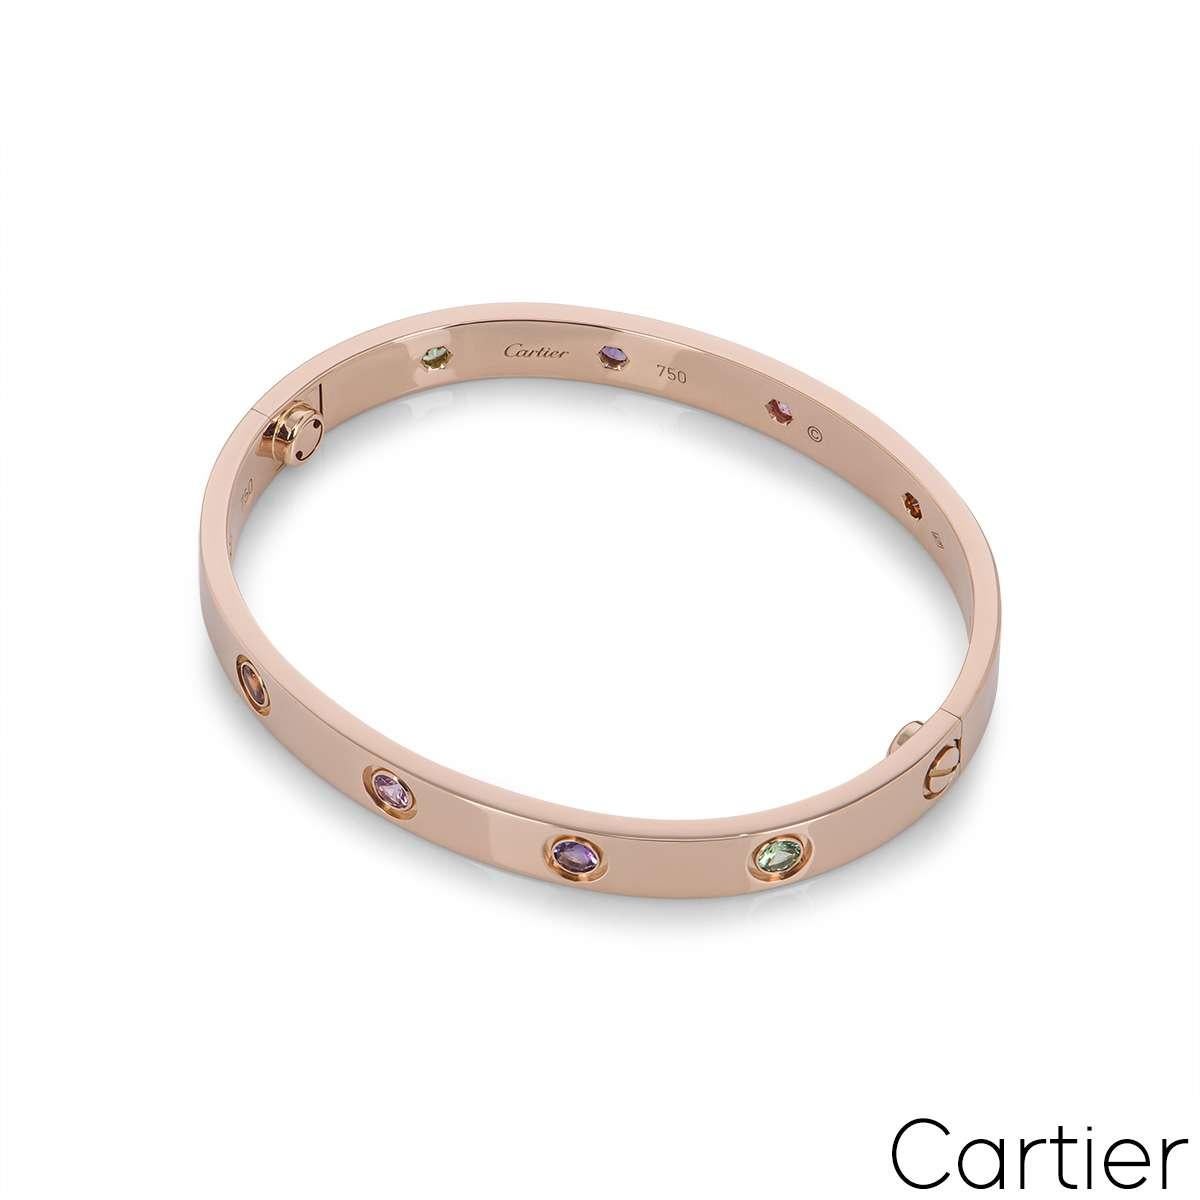 Cartier Rose Gold Coloured Stones Love Bracelet Size 16 B6036516 In Excellent Condition For Sale In London, GB